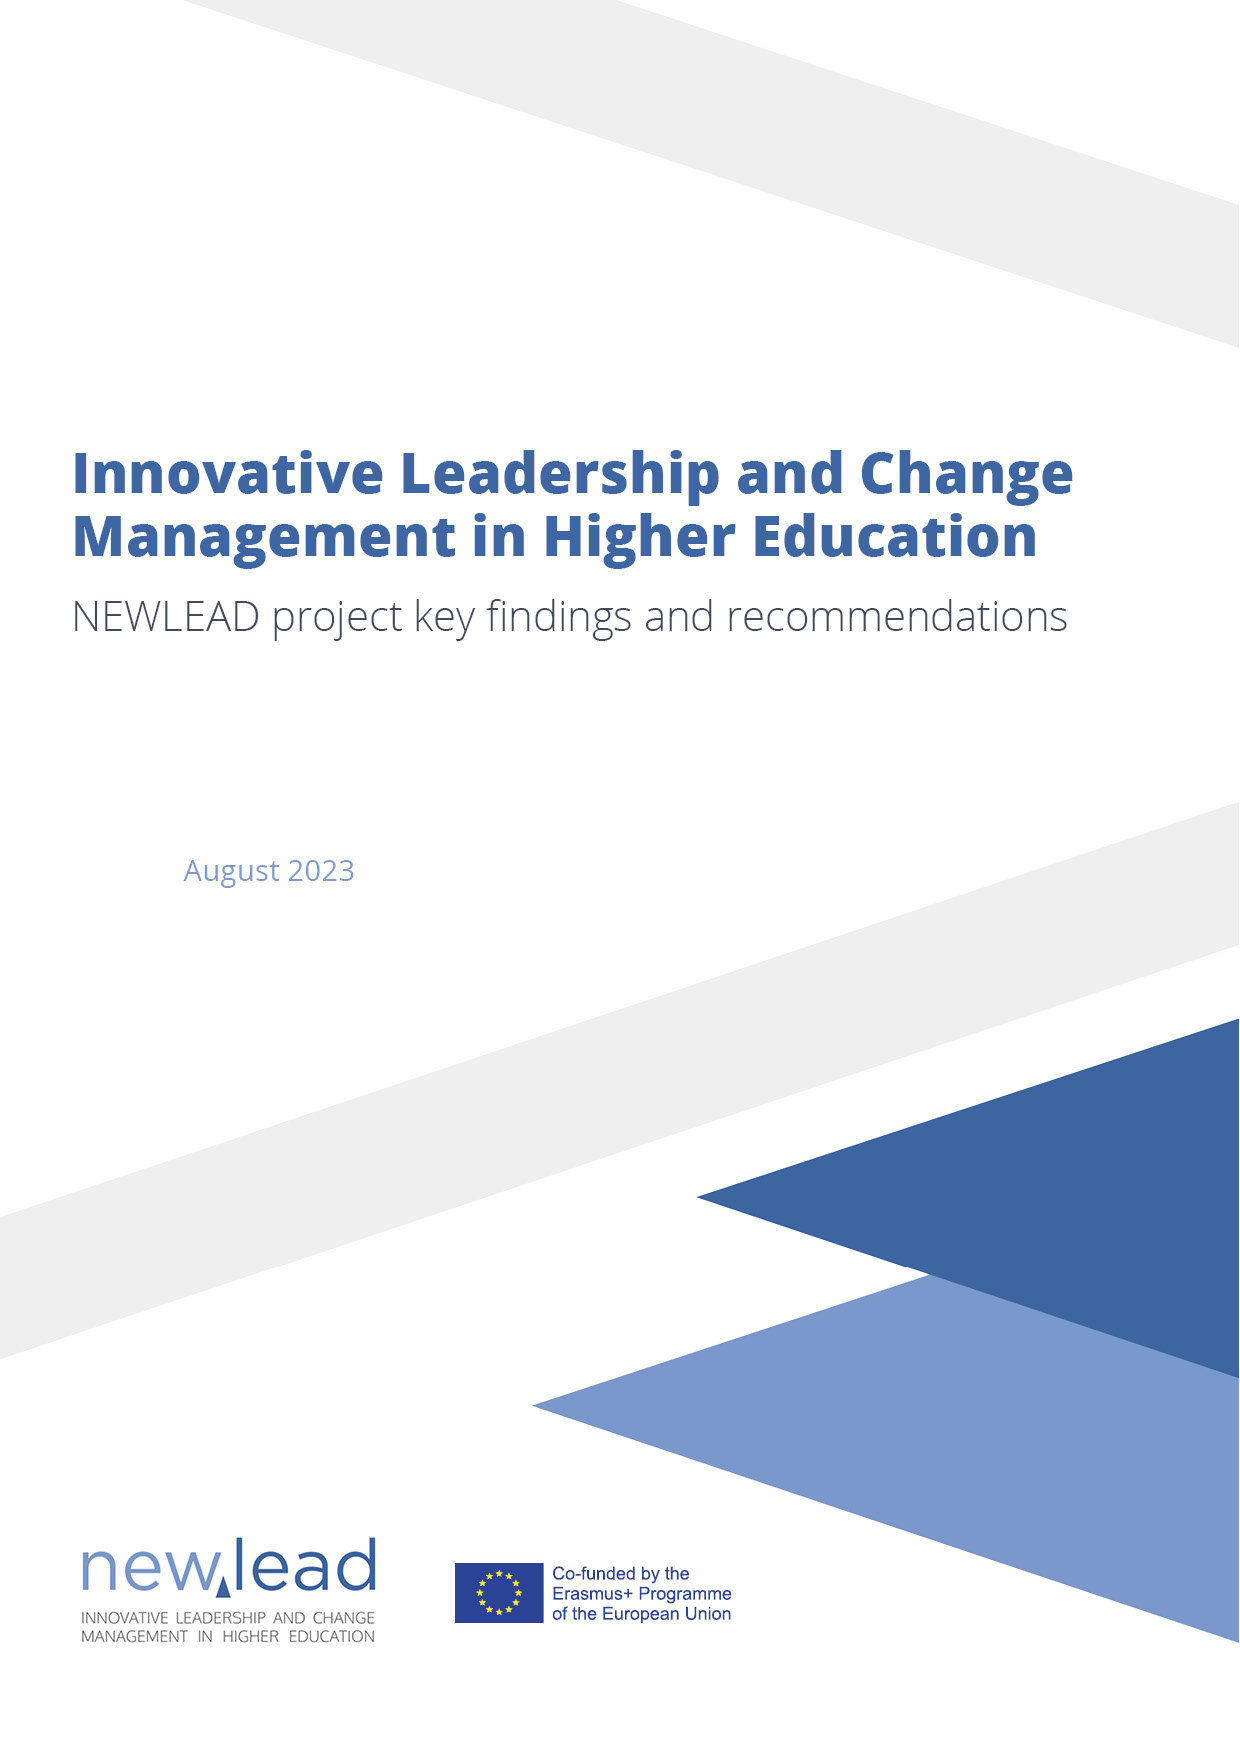 Innovative Leadership and Change Management in Higher Education - NEWLEAD project key findings and recommendations